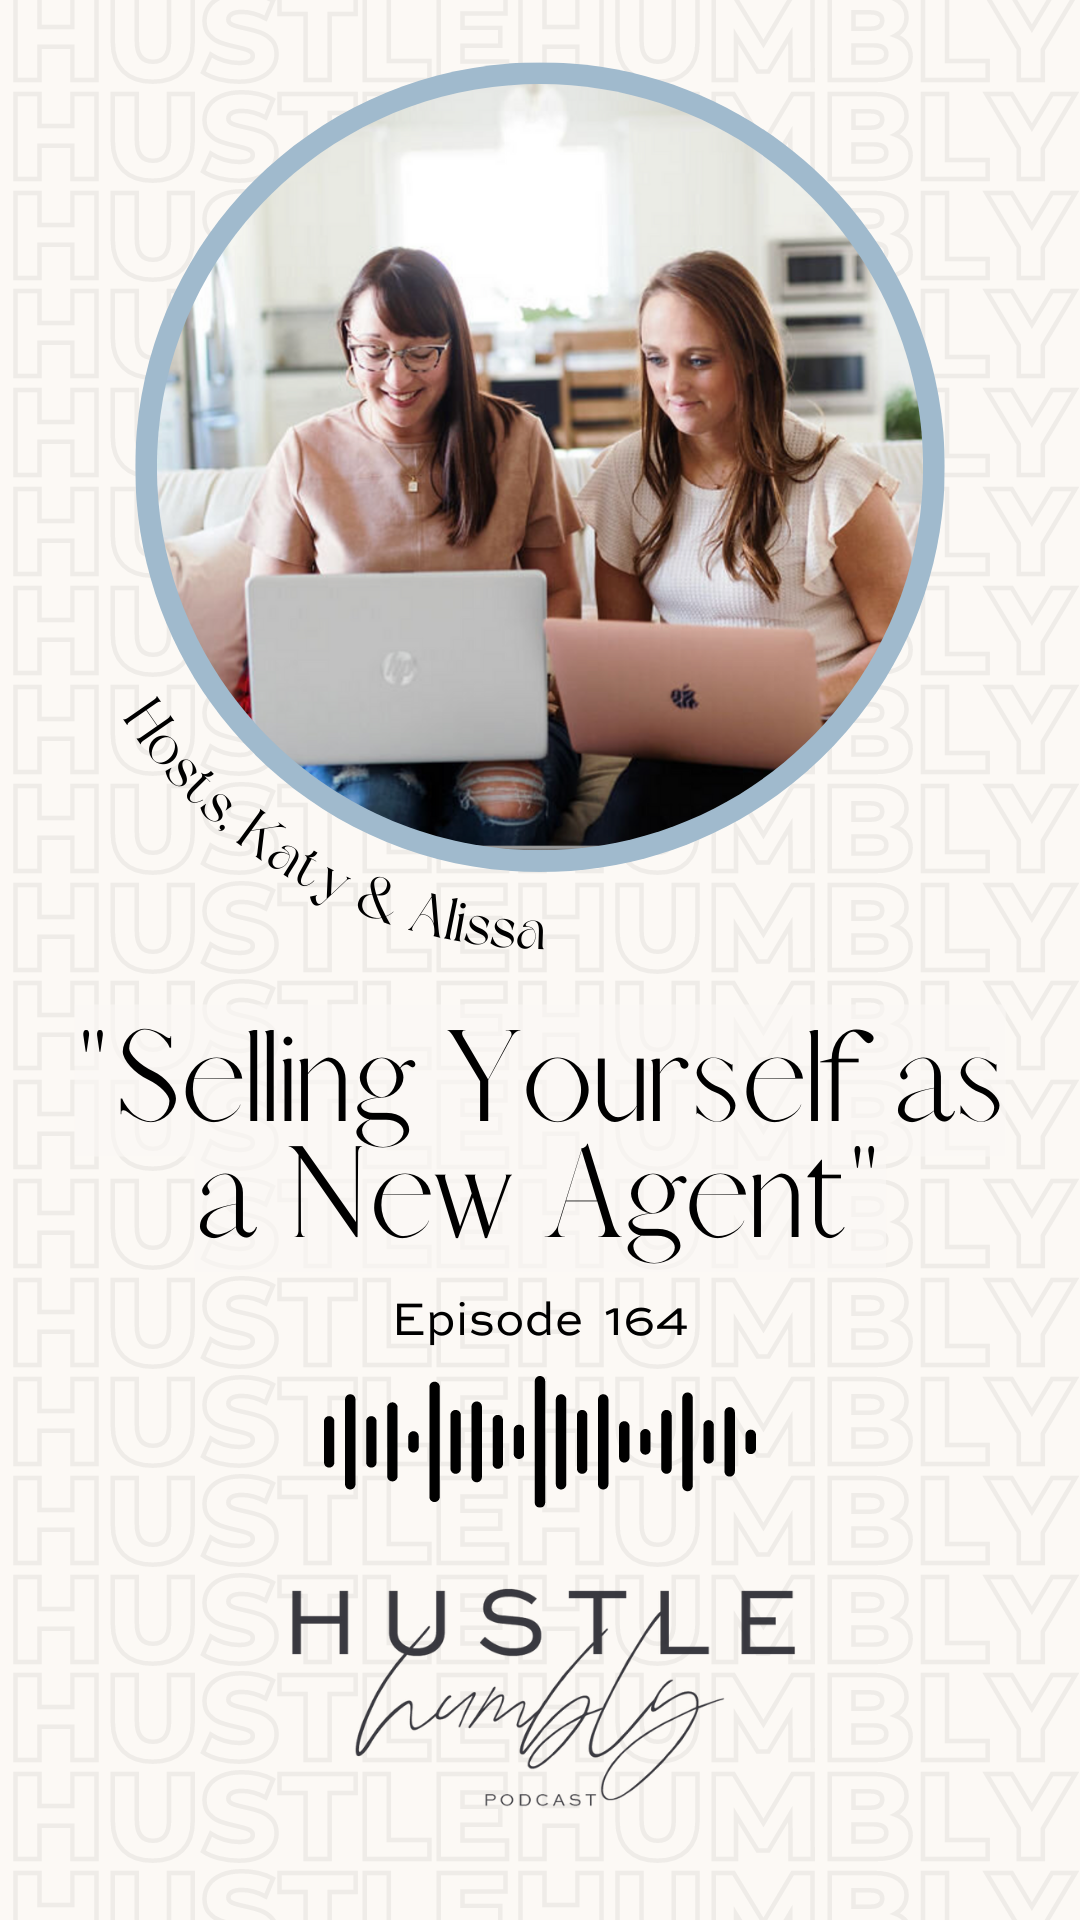  Hustle Humbly Podcast Episode 164: Selling Yourself as a New Agent